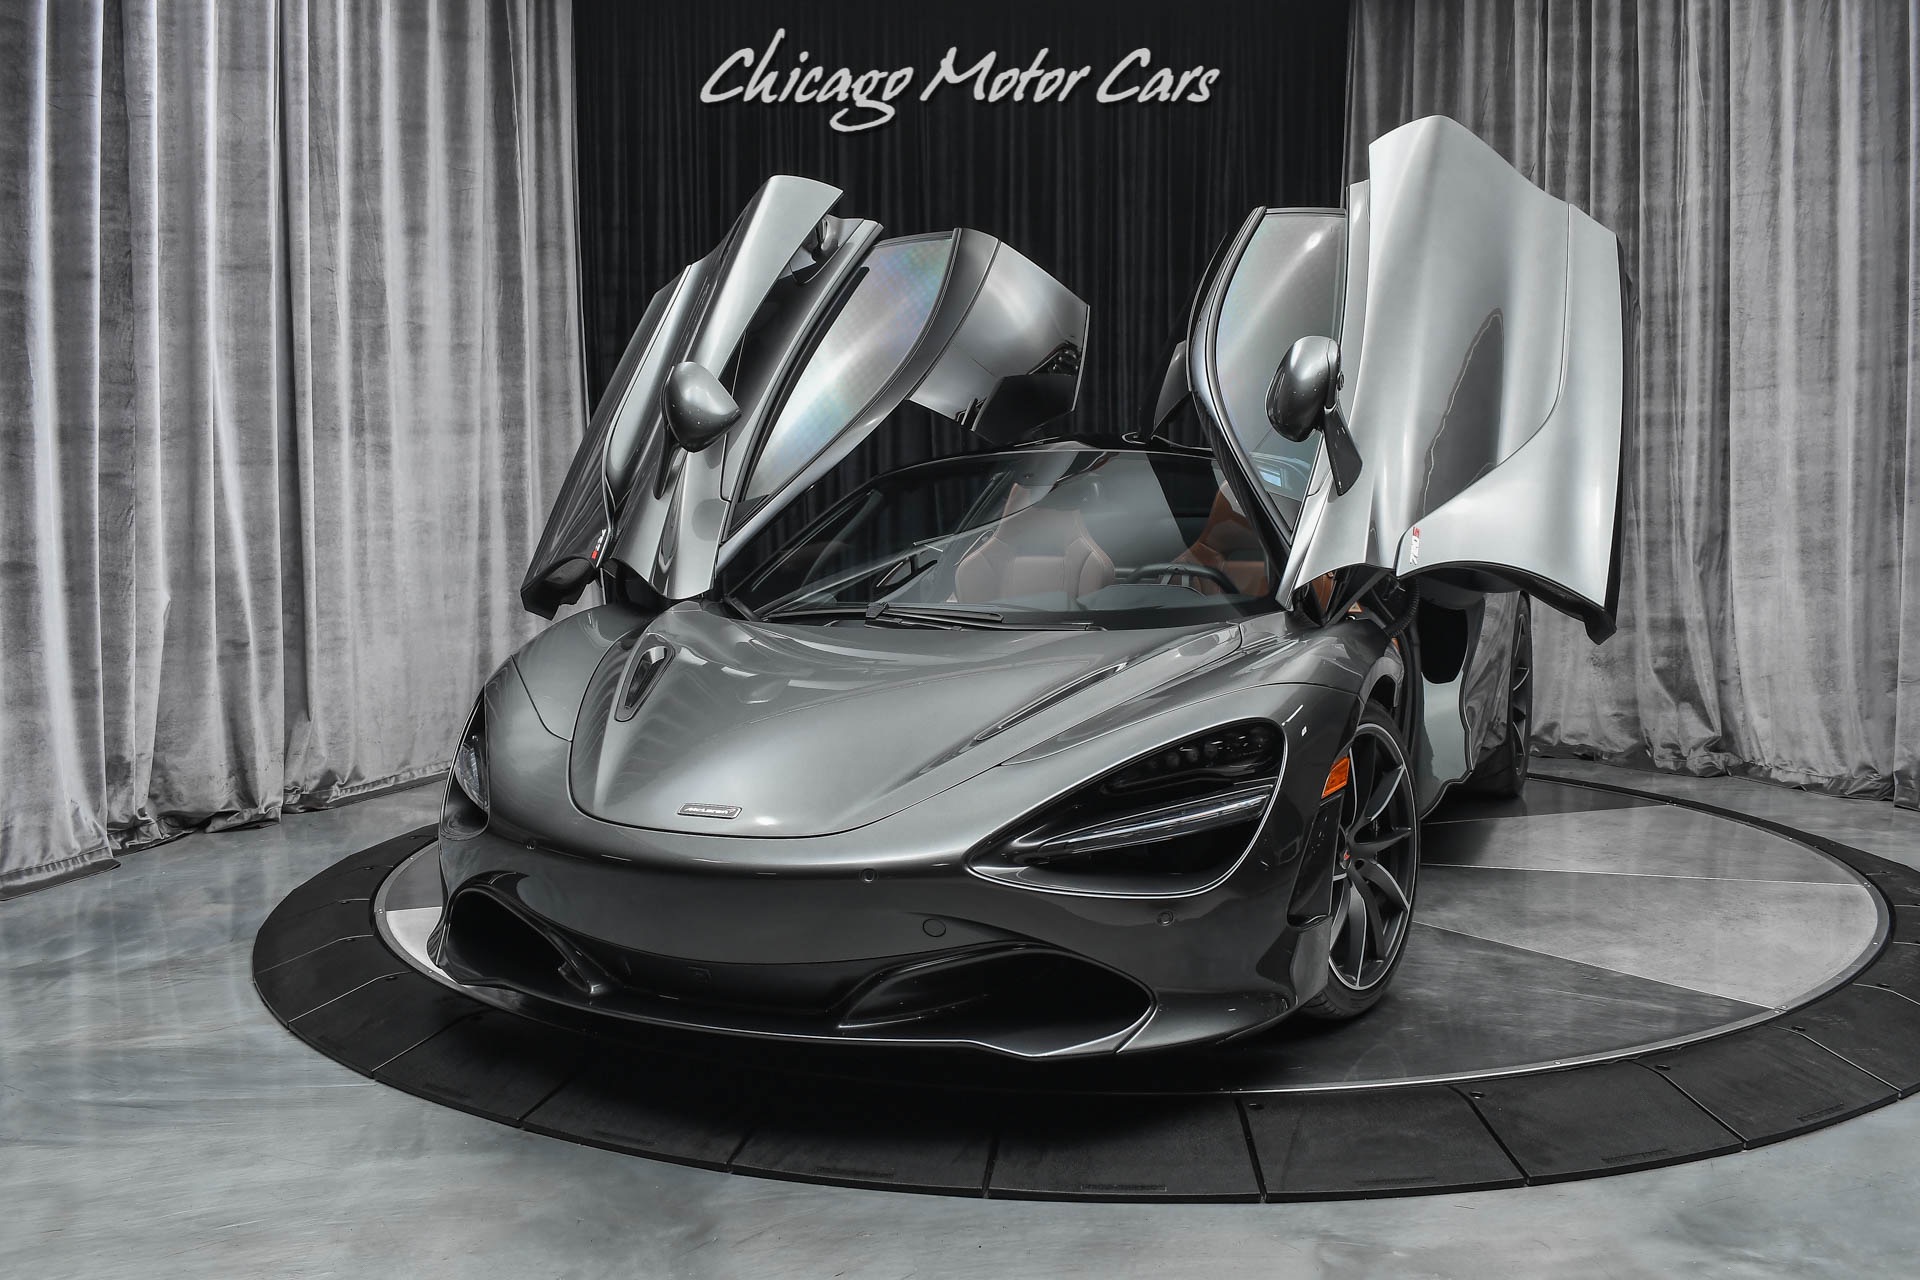 Used-2018-McLaren-720S-Luxury-Coupe-LOADED-WITH-THOUSAND-IN-OPTIONS-TASTEFULLY-MODIFIED